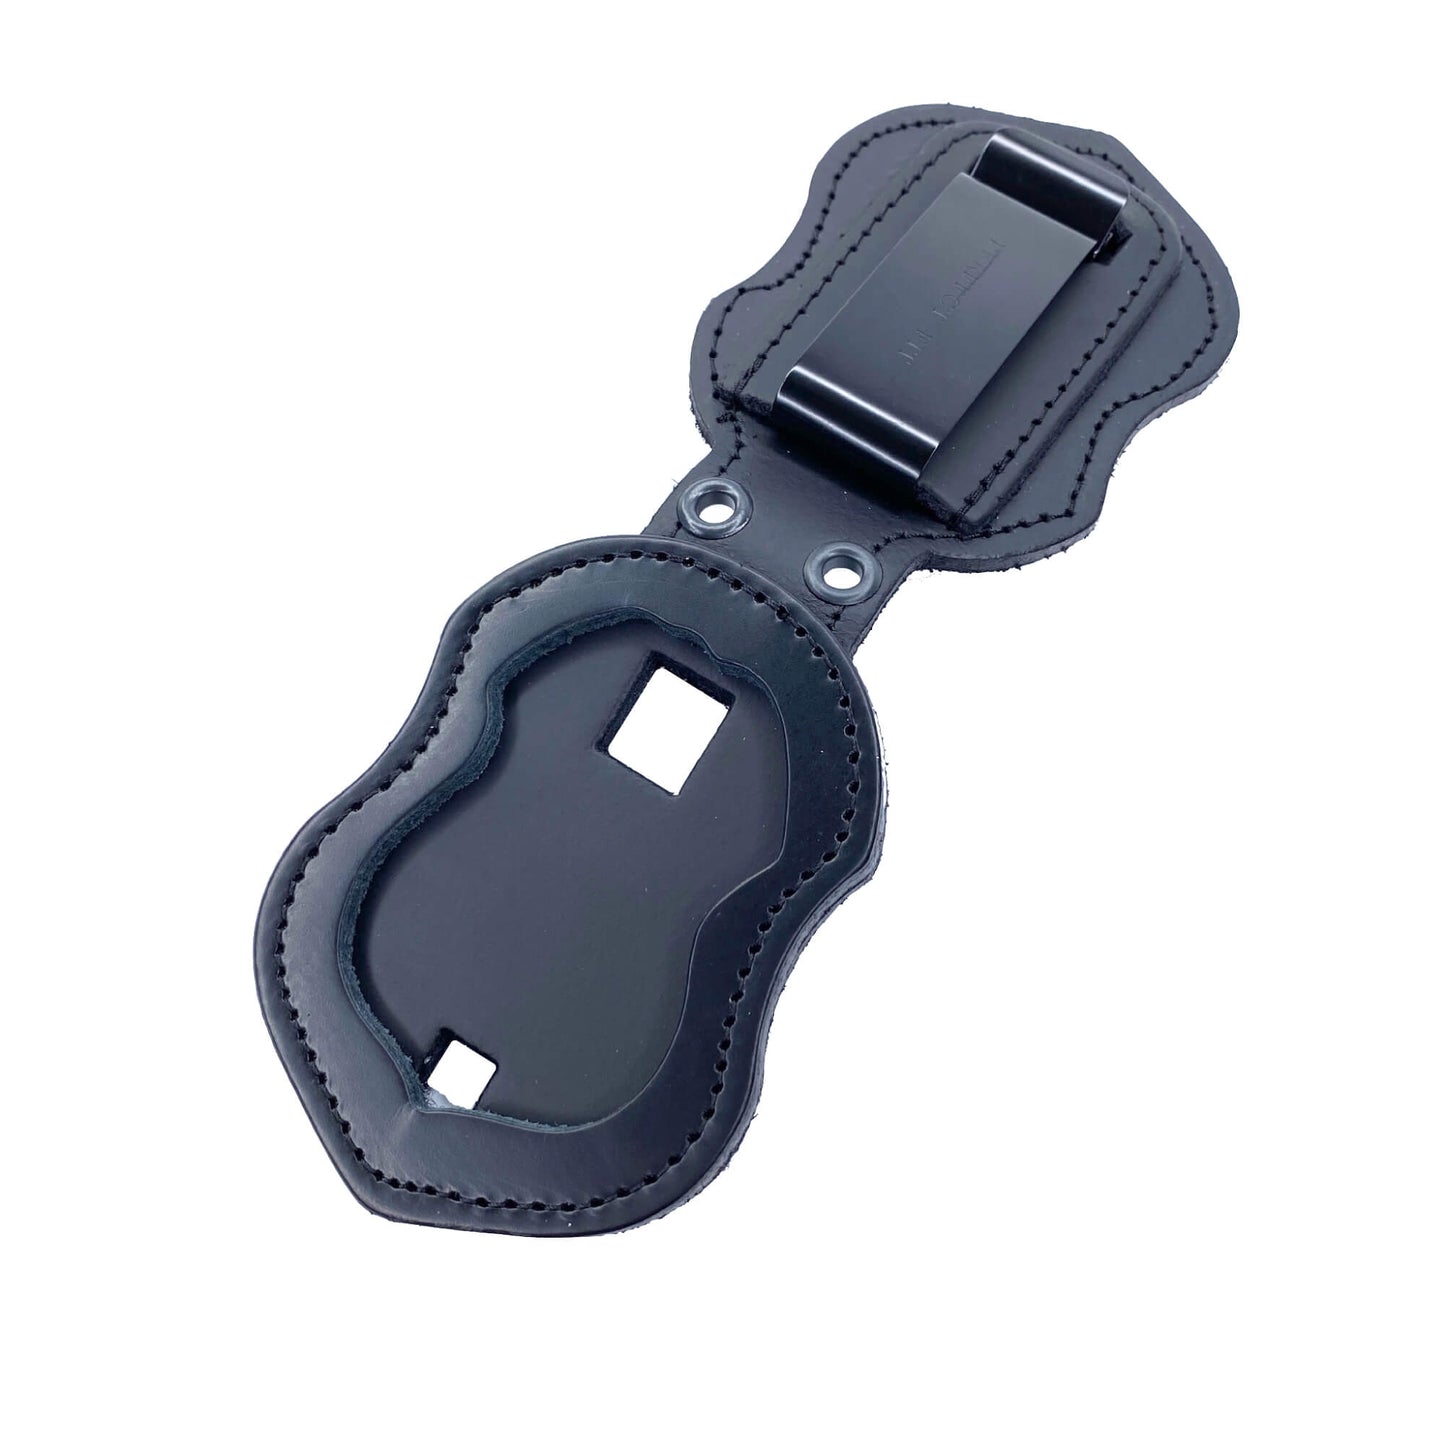 U.S. Immigration and Customs Enforcement - ICE (2.5 in.) Badge Belt Holder & Neck Chain-Perfect Fit-911 Duty Gear USA